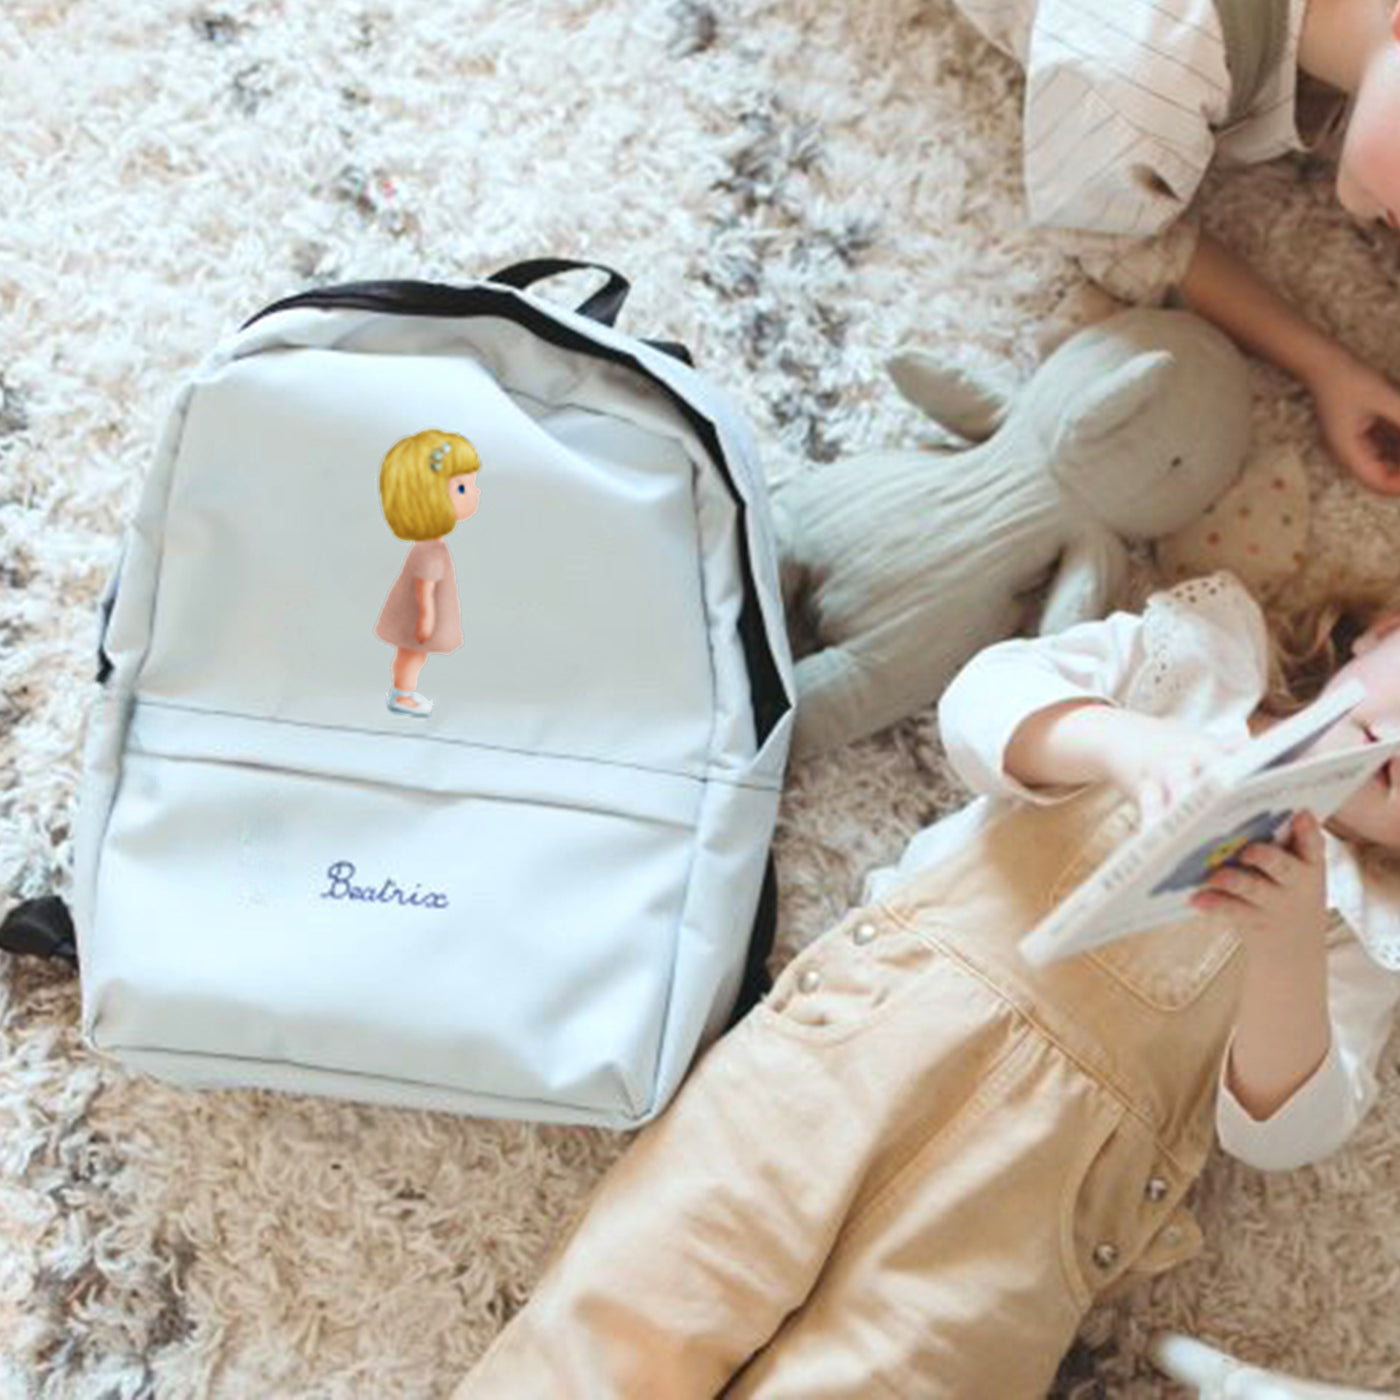 Personalized Backpacks